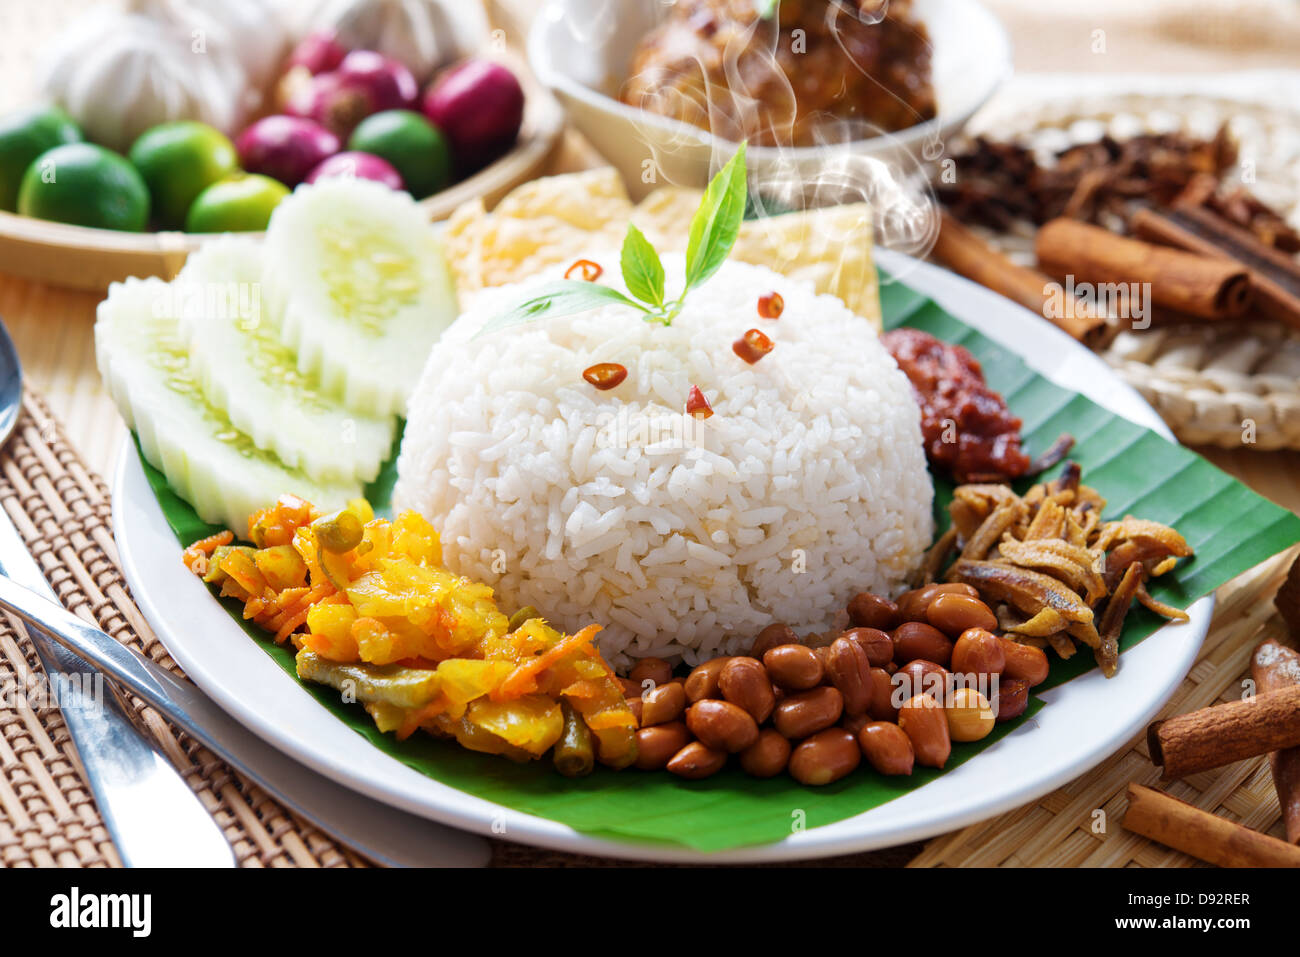 Nasi lemak traditional malaysian hot and spicy rice dish, fresh cooked with hot steam. Served with belacan, ikan bilis, acar, peanuts and cucumber. Decoration setup. Stock Photo